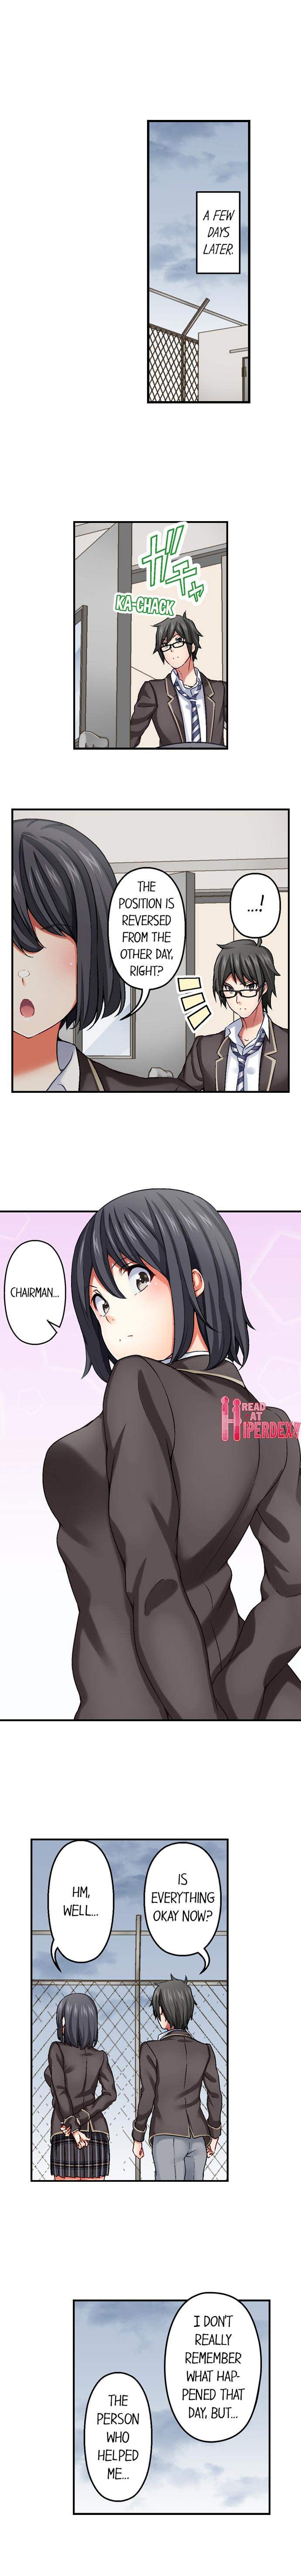 Nozoki Connect - Chapter 9 Page 7